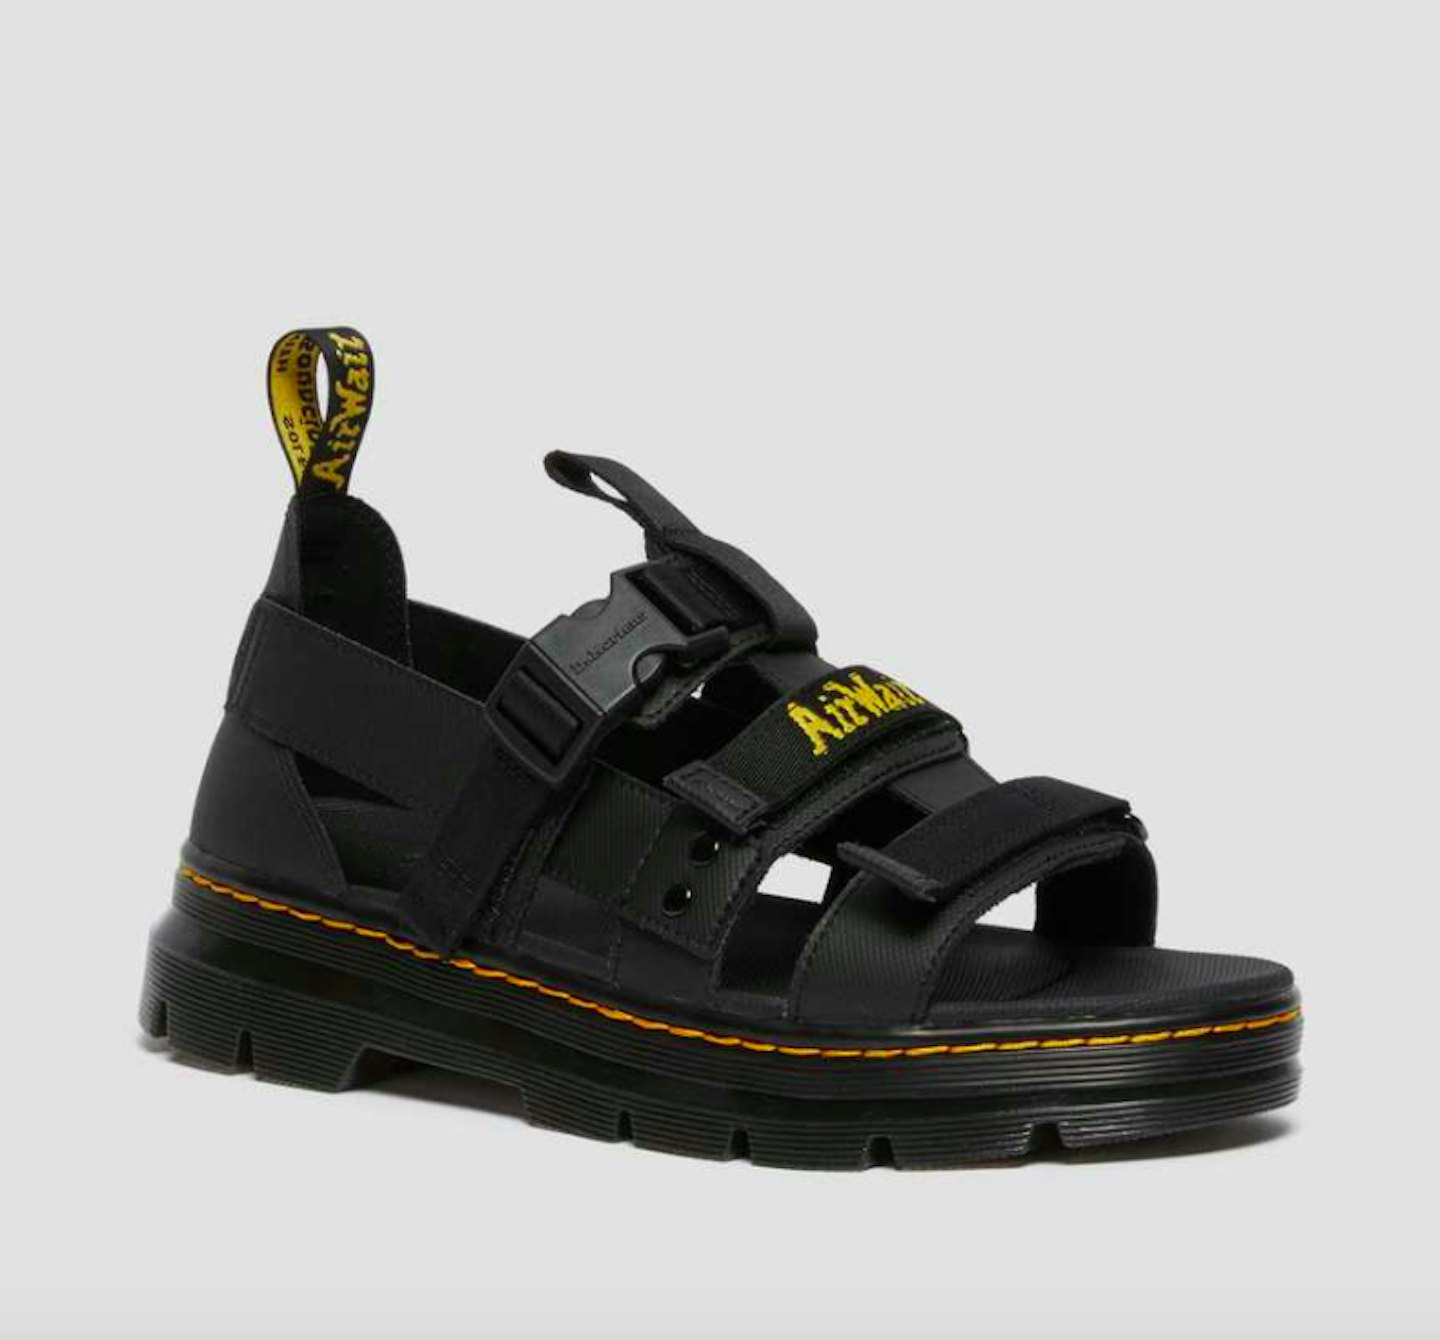 Dr. Martens, Pearson Strappy Webbing Sandals, £89